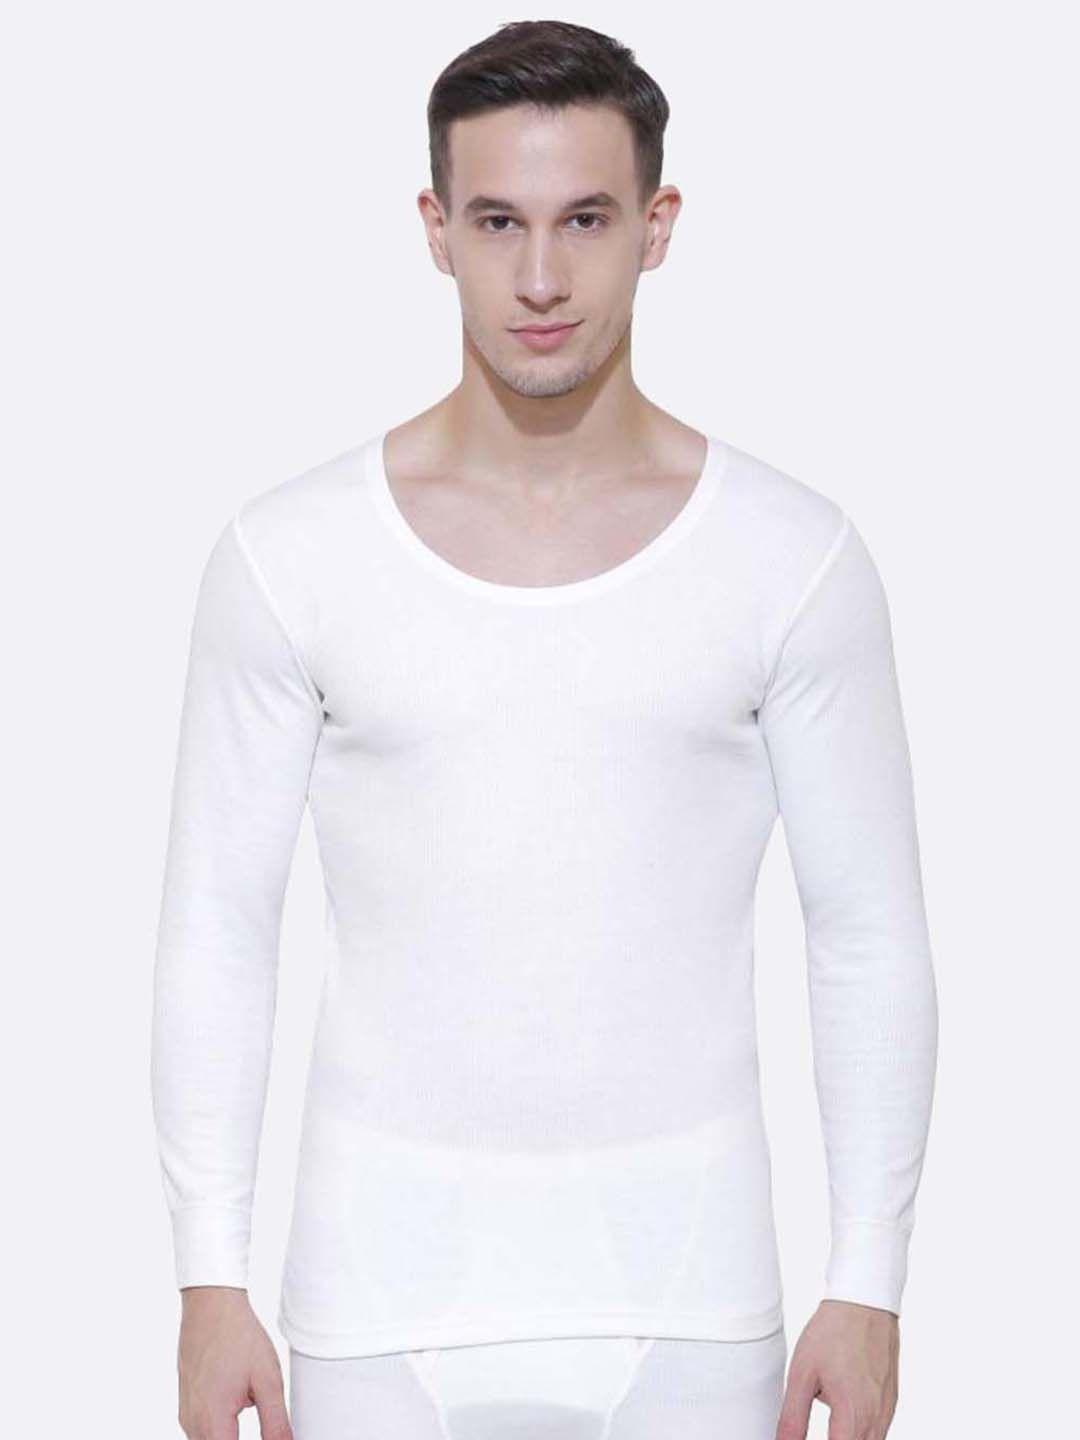 dyca-men-off-white-solid-cotton-thermal-tops